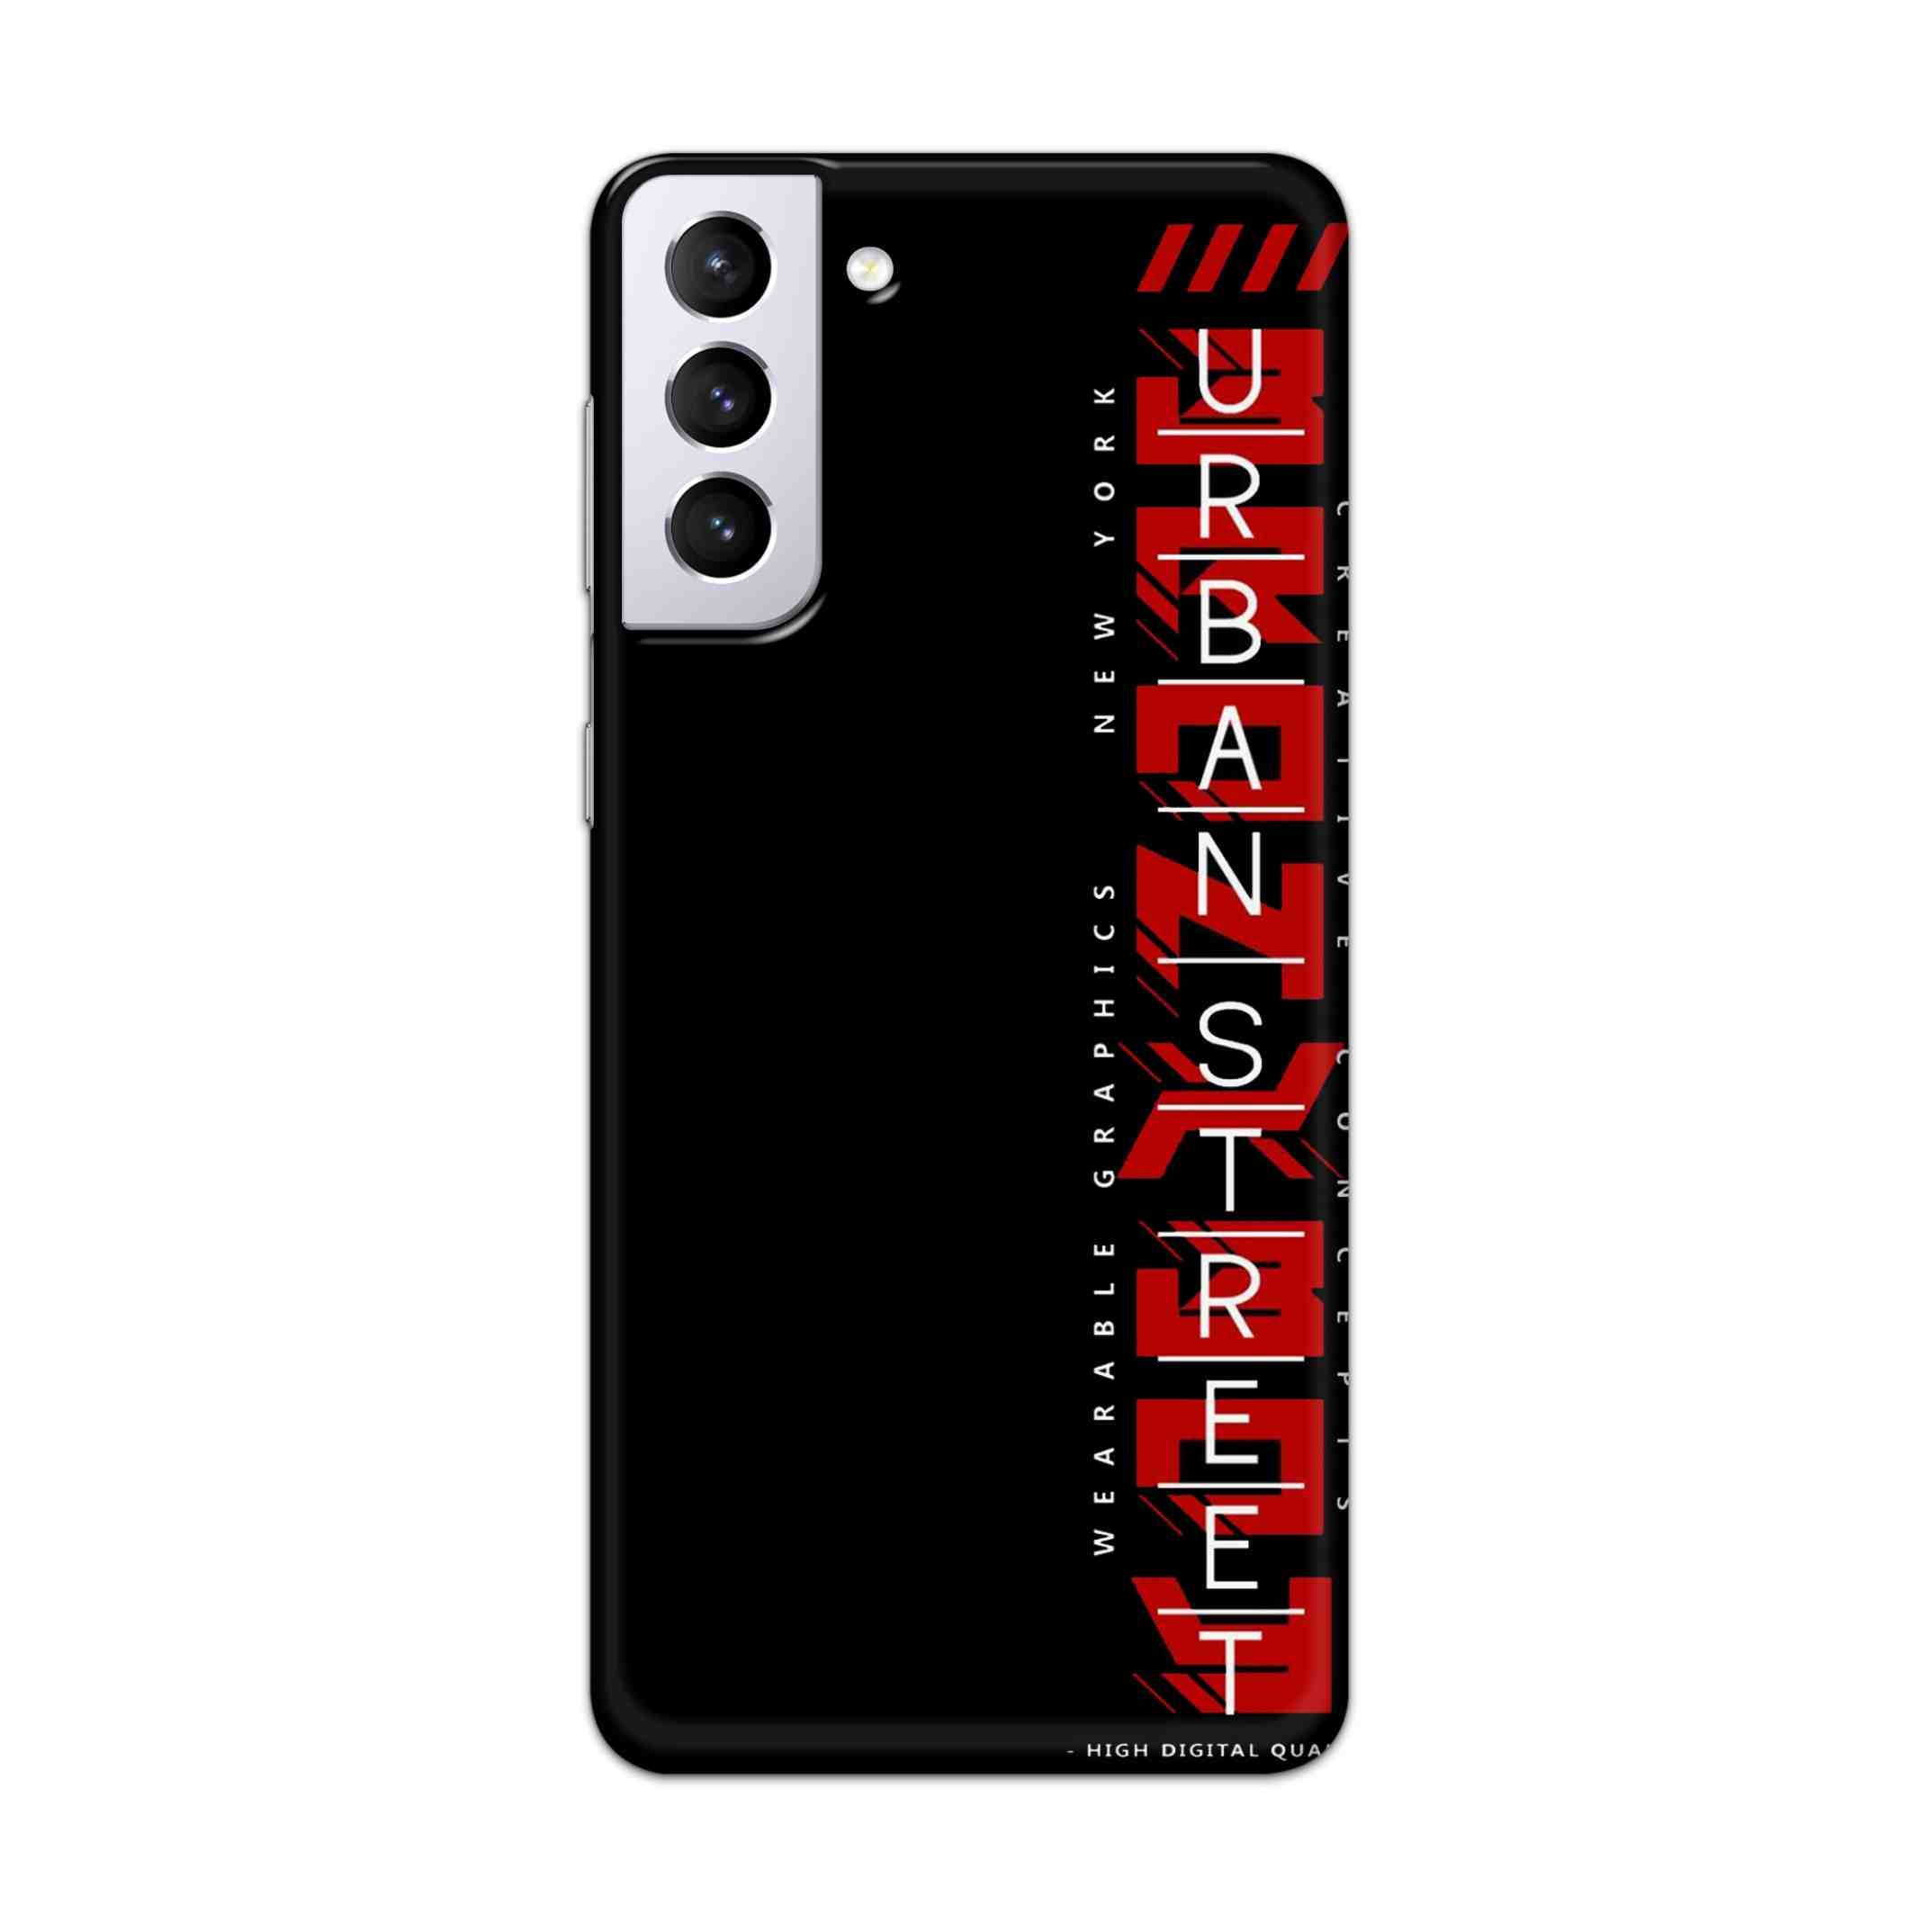 Buy Urban Street Hard Back Mobile Phone Case Cover For Samsung Galaxy S21 Plus Online